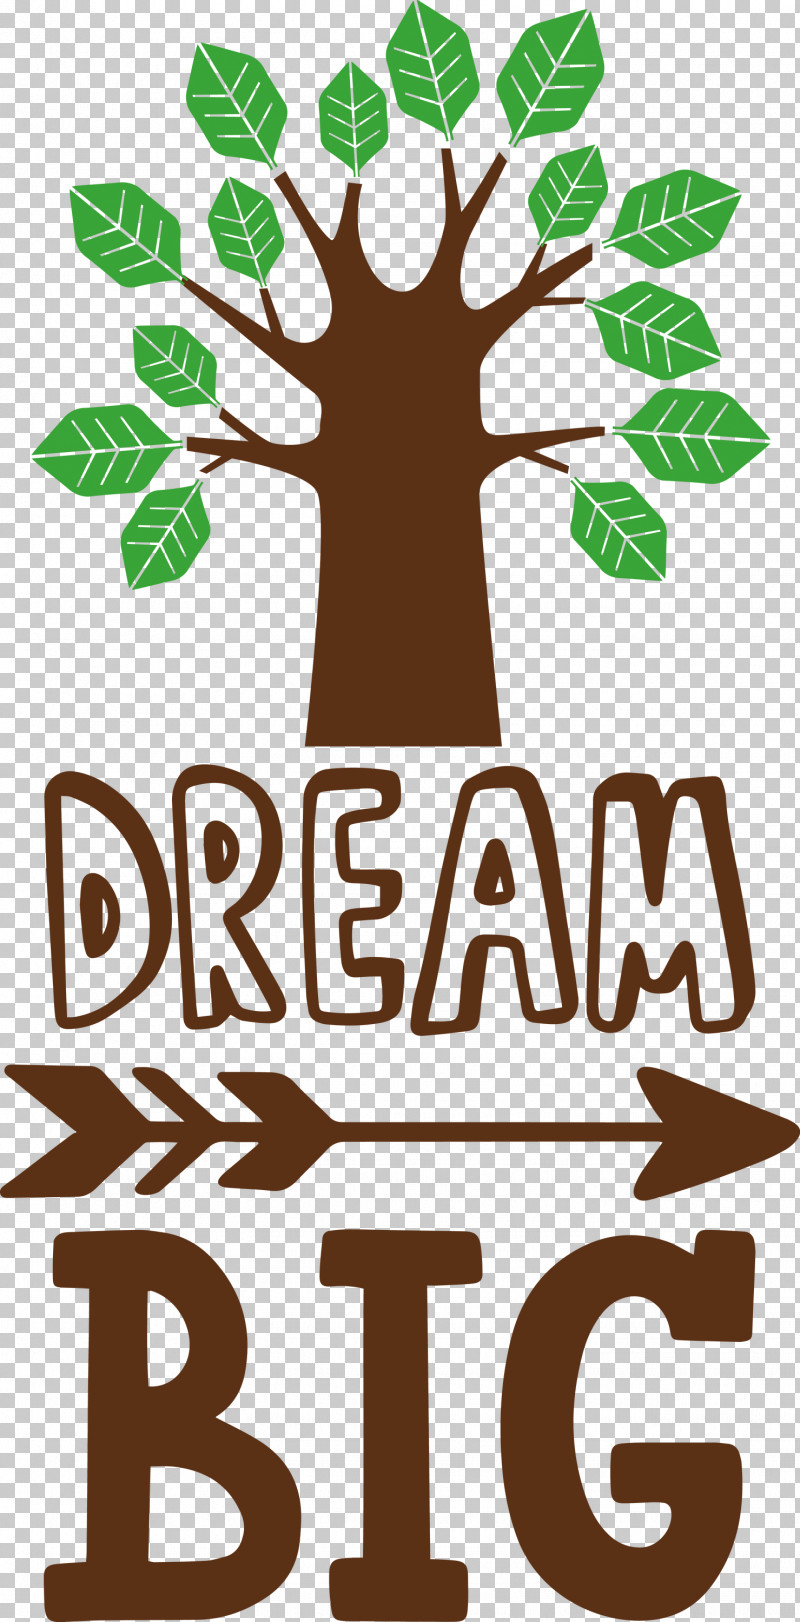 Dream Big PNG, Clipart, Drawing, Dream Big, Logo, Painting, Poster Free PNG Download